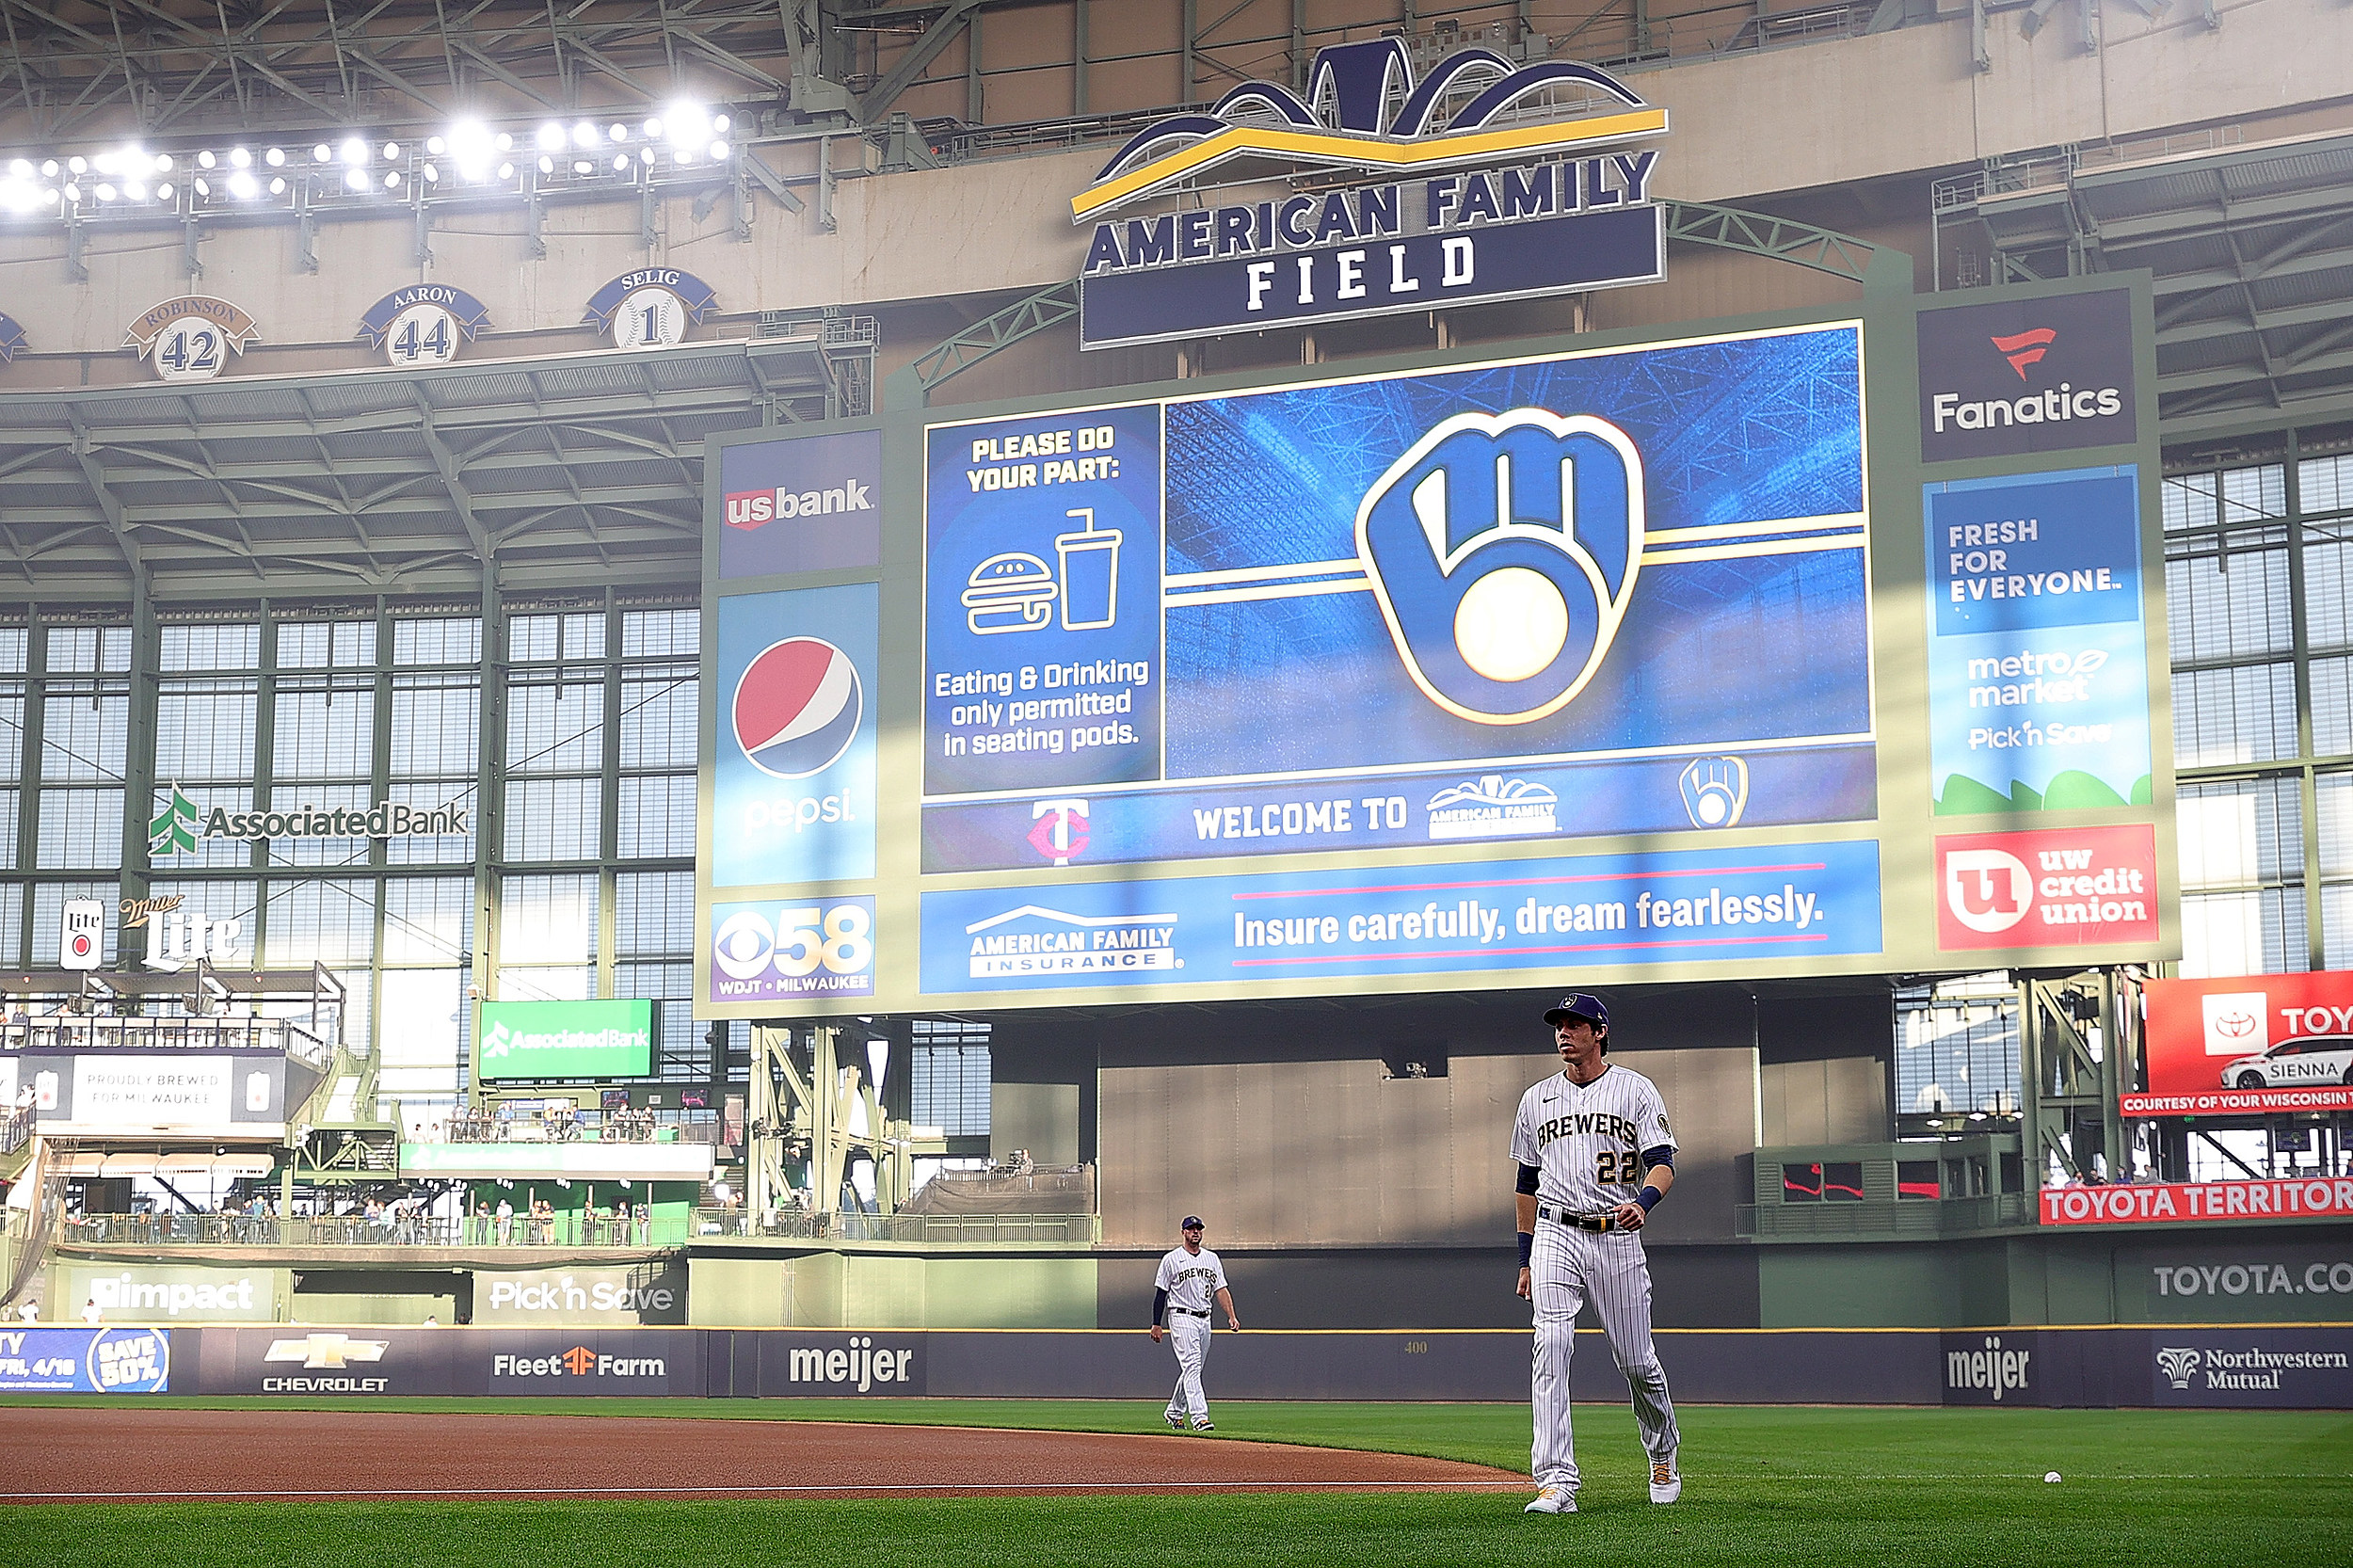 Milwaukee Brewers announce promotional schedule for remainder of 2021 -  Brew Crew Ball